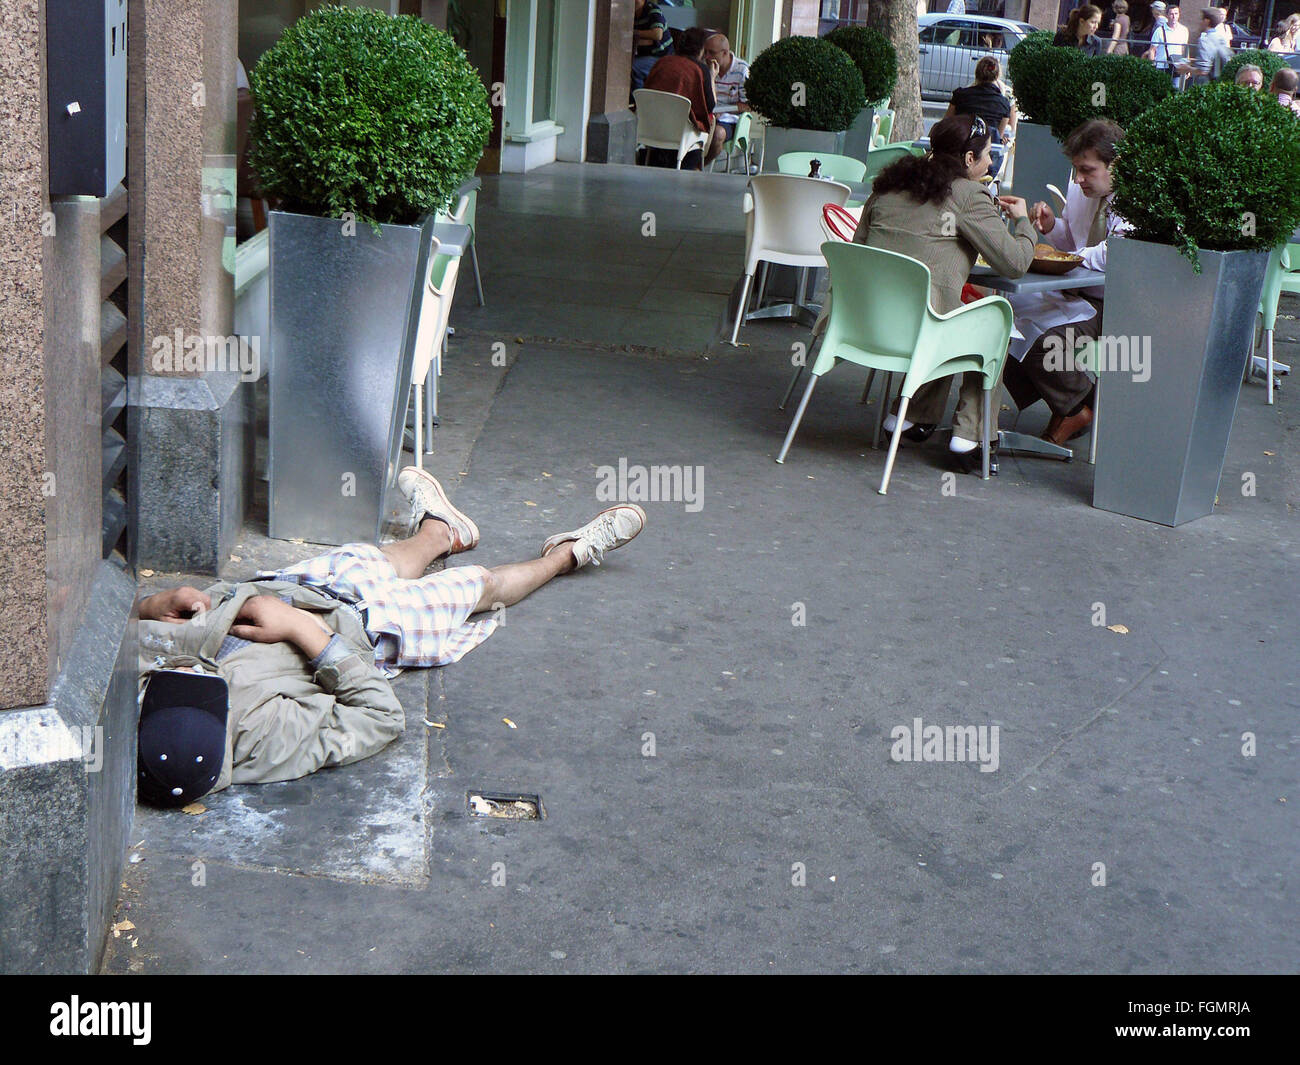 Drunk Passed Out On Pavement Next Tol Fresco Diners London Credit Image © Jack Ludlam Stock